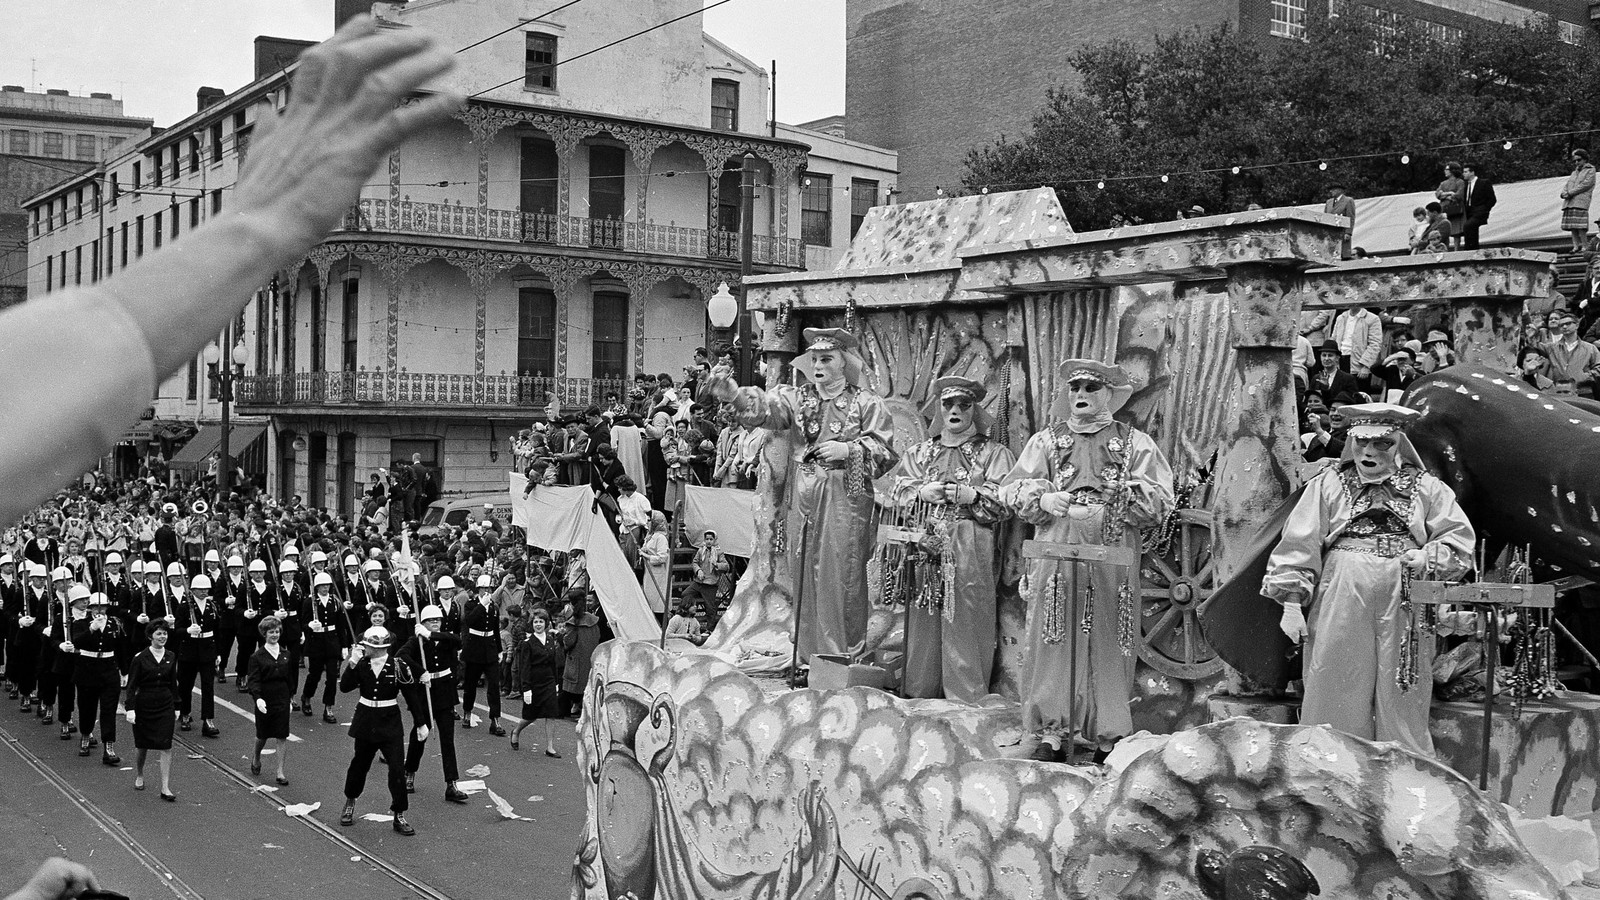 New Orleans Pictures Black and White: The Louisiana Supreme